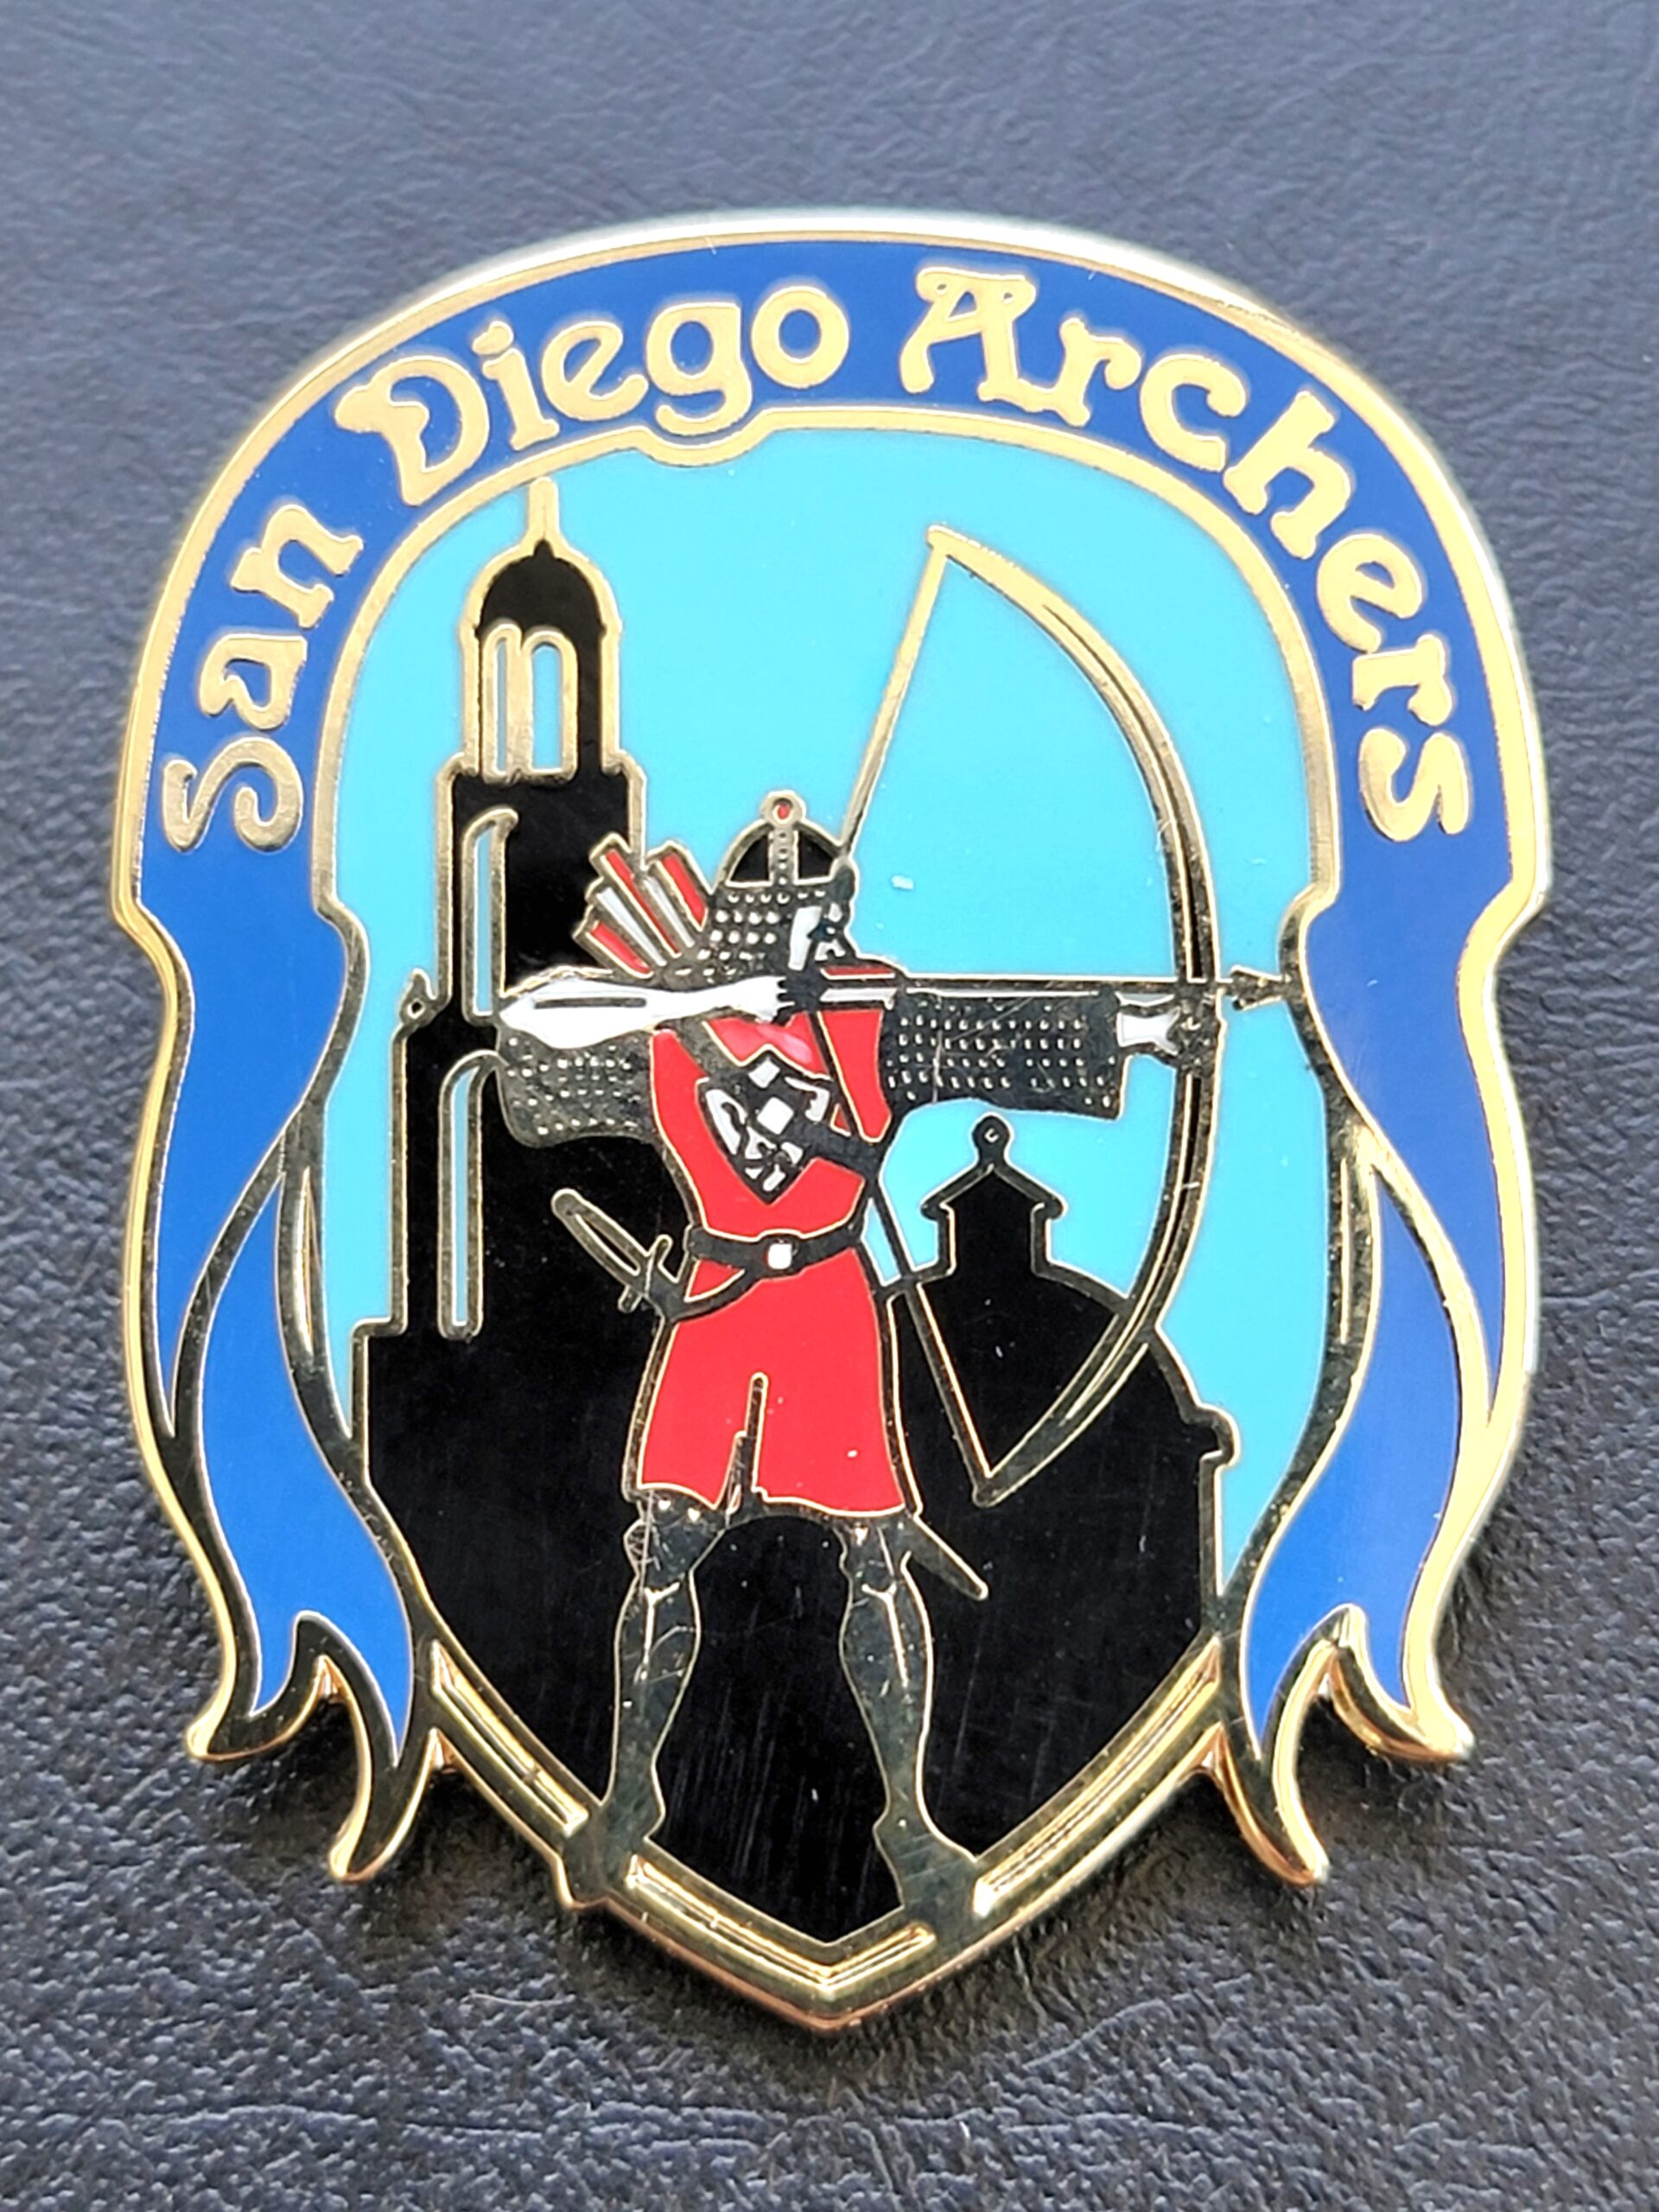 San Diego Archers 2022-1st Place Pin